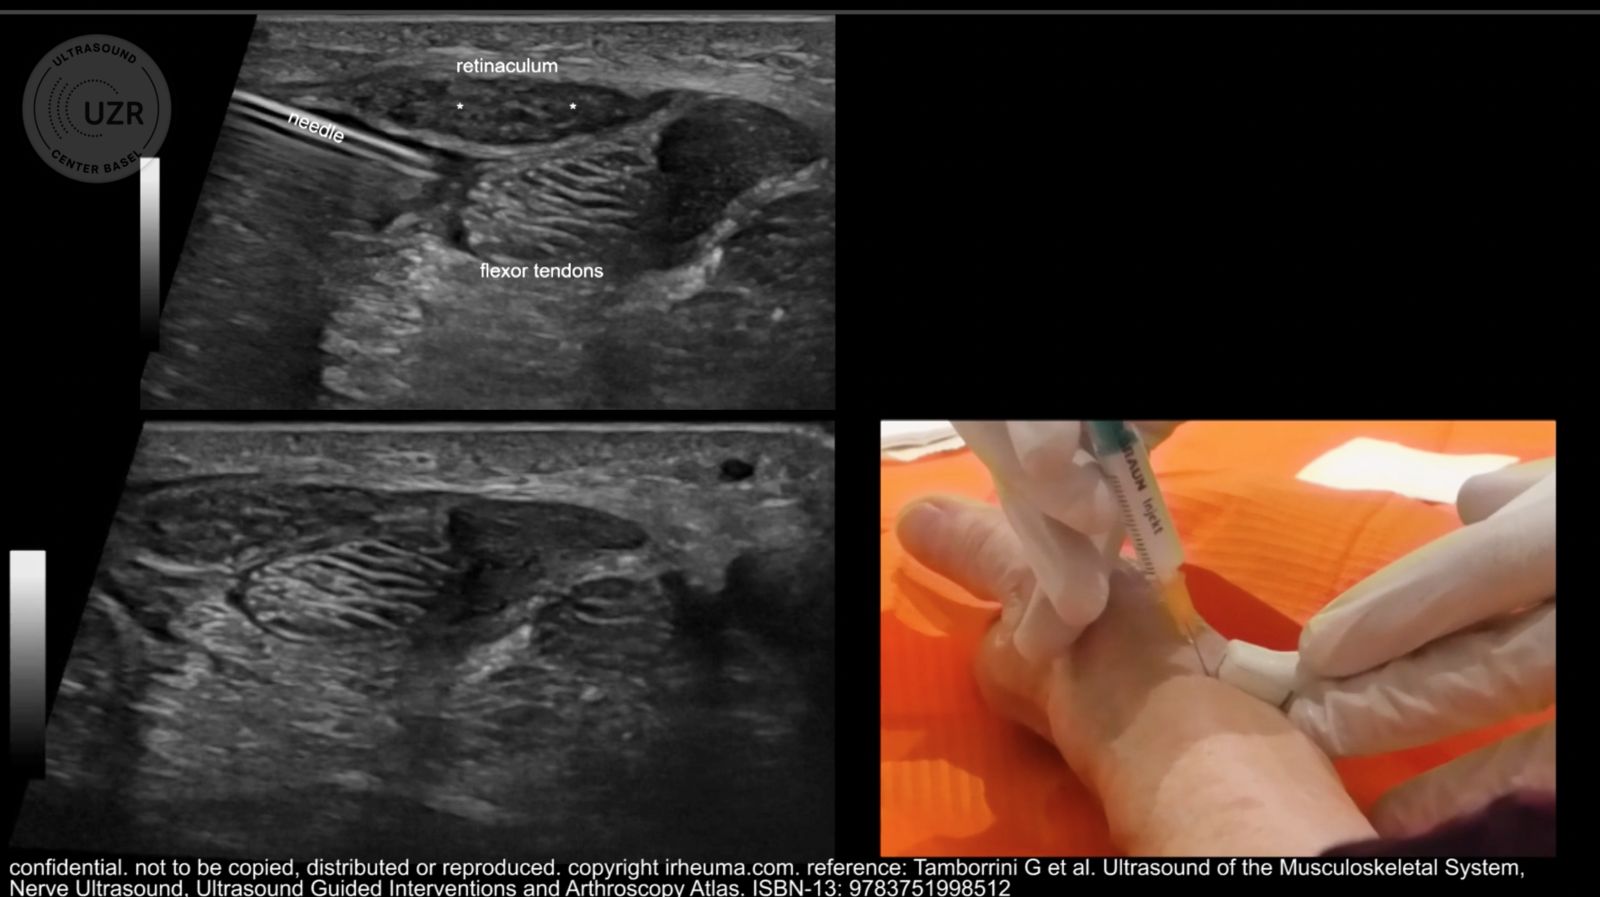 The use of ultrasound to assess carpal tunnel syndrome.